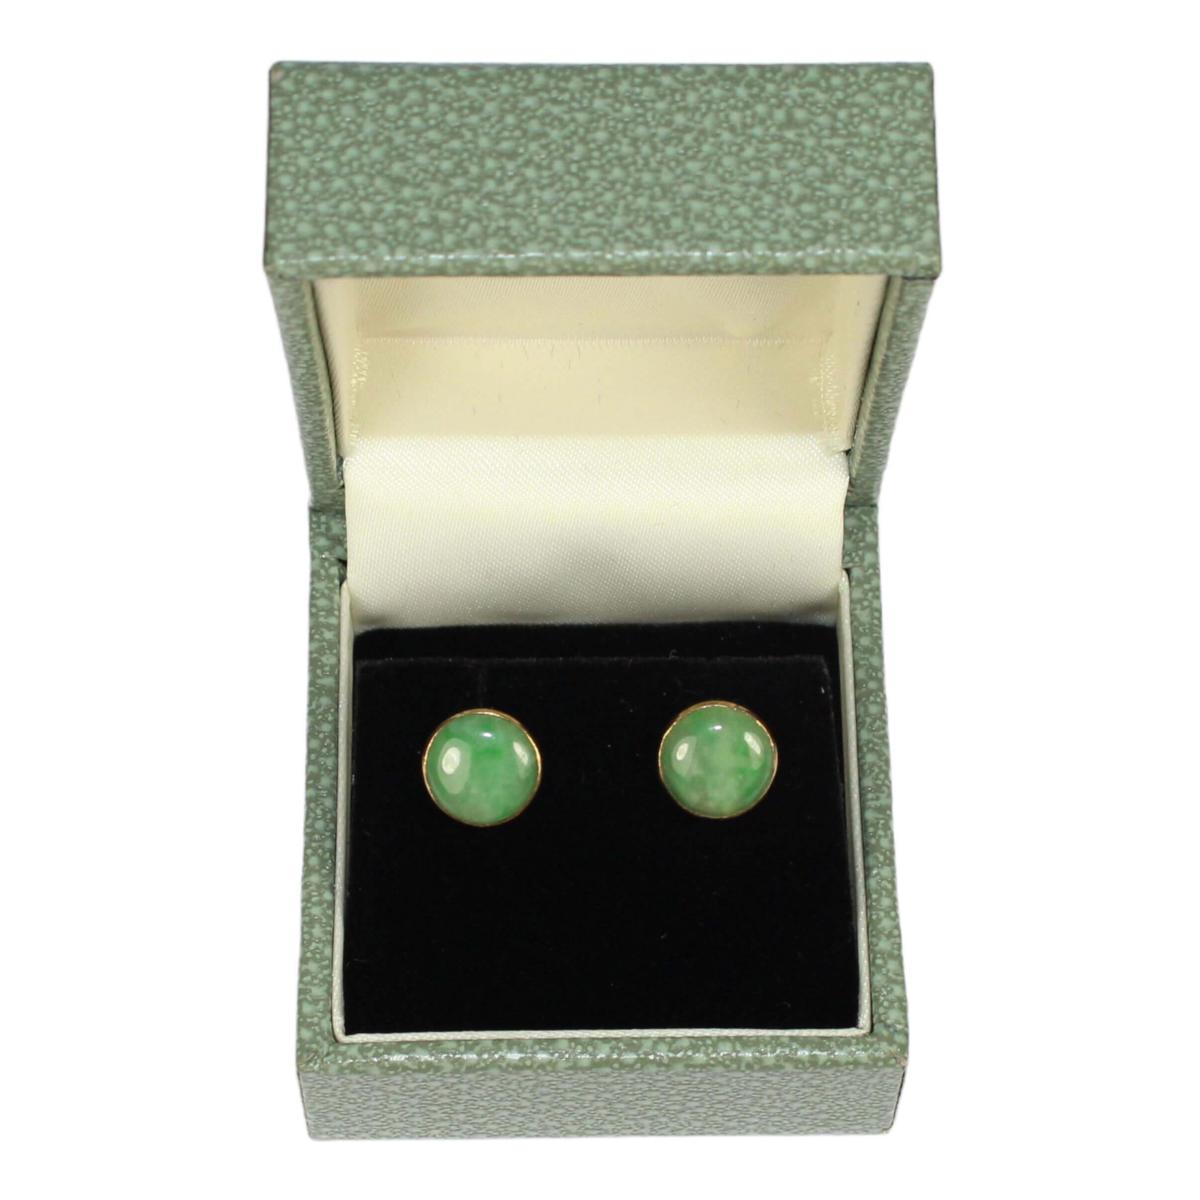 Chinese Retro Jewelry Antique Collection Qing Dynasty Old Jade Earrings  Collect | eBay